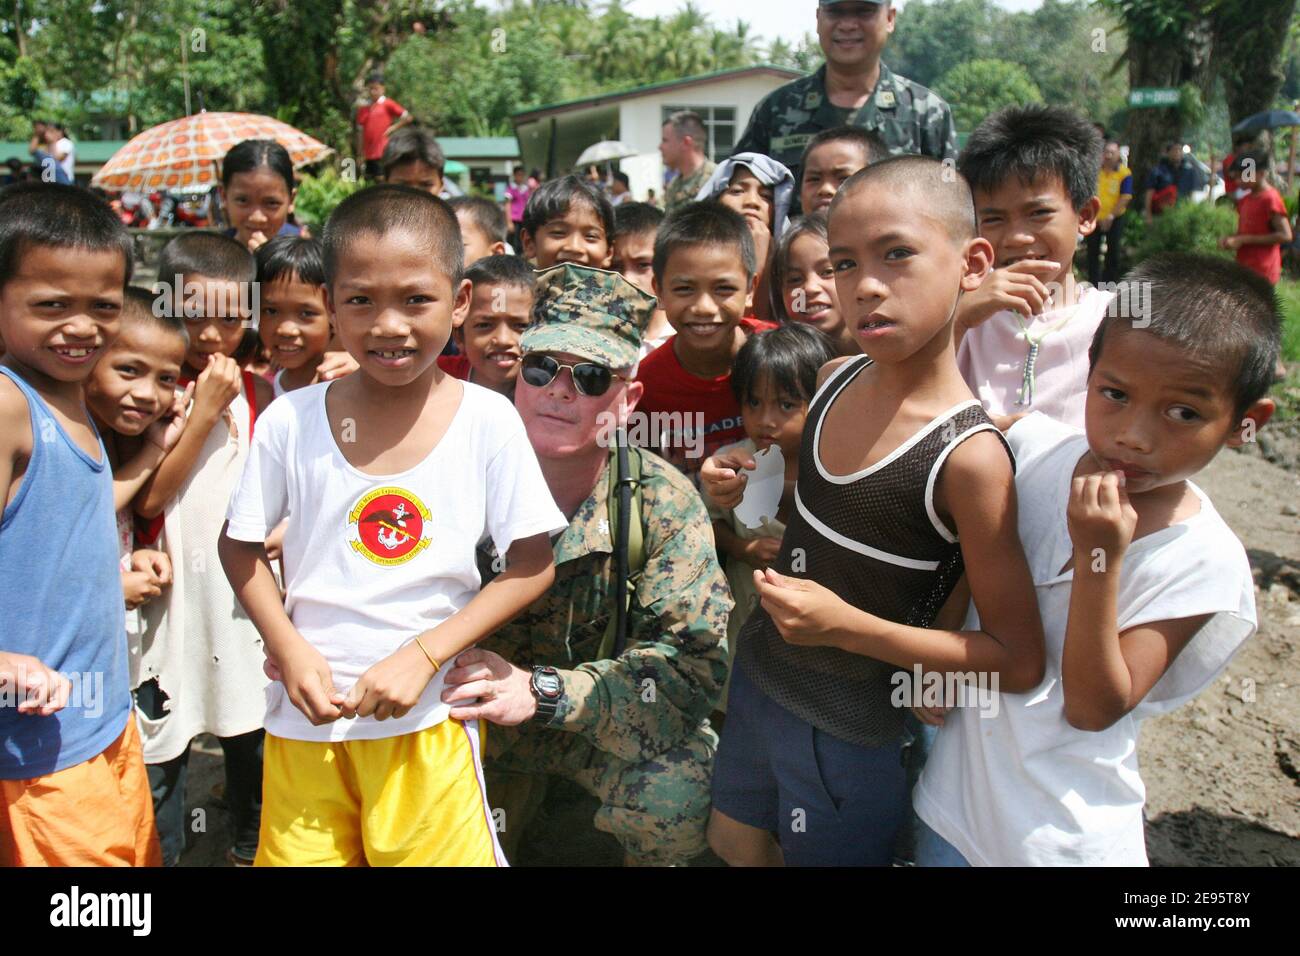 Colonel Walter L. Miller, Jr., commanding officer of the 31st Marine Expeditionary Unit spends a few moments with children from the area around the devastated town of Guinsahugon located in the southern part of the island of Leyte in the Philippines. Guinsahugon was destroyed February 17, 2006 by a mudslide from a nearby mountain. Photo USN via ABACAPRESS.COM Stock Photo